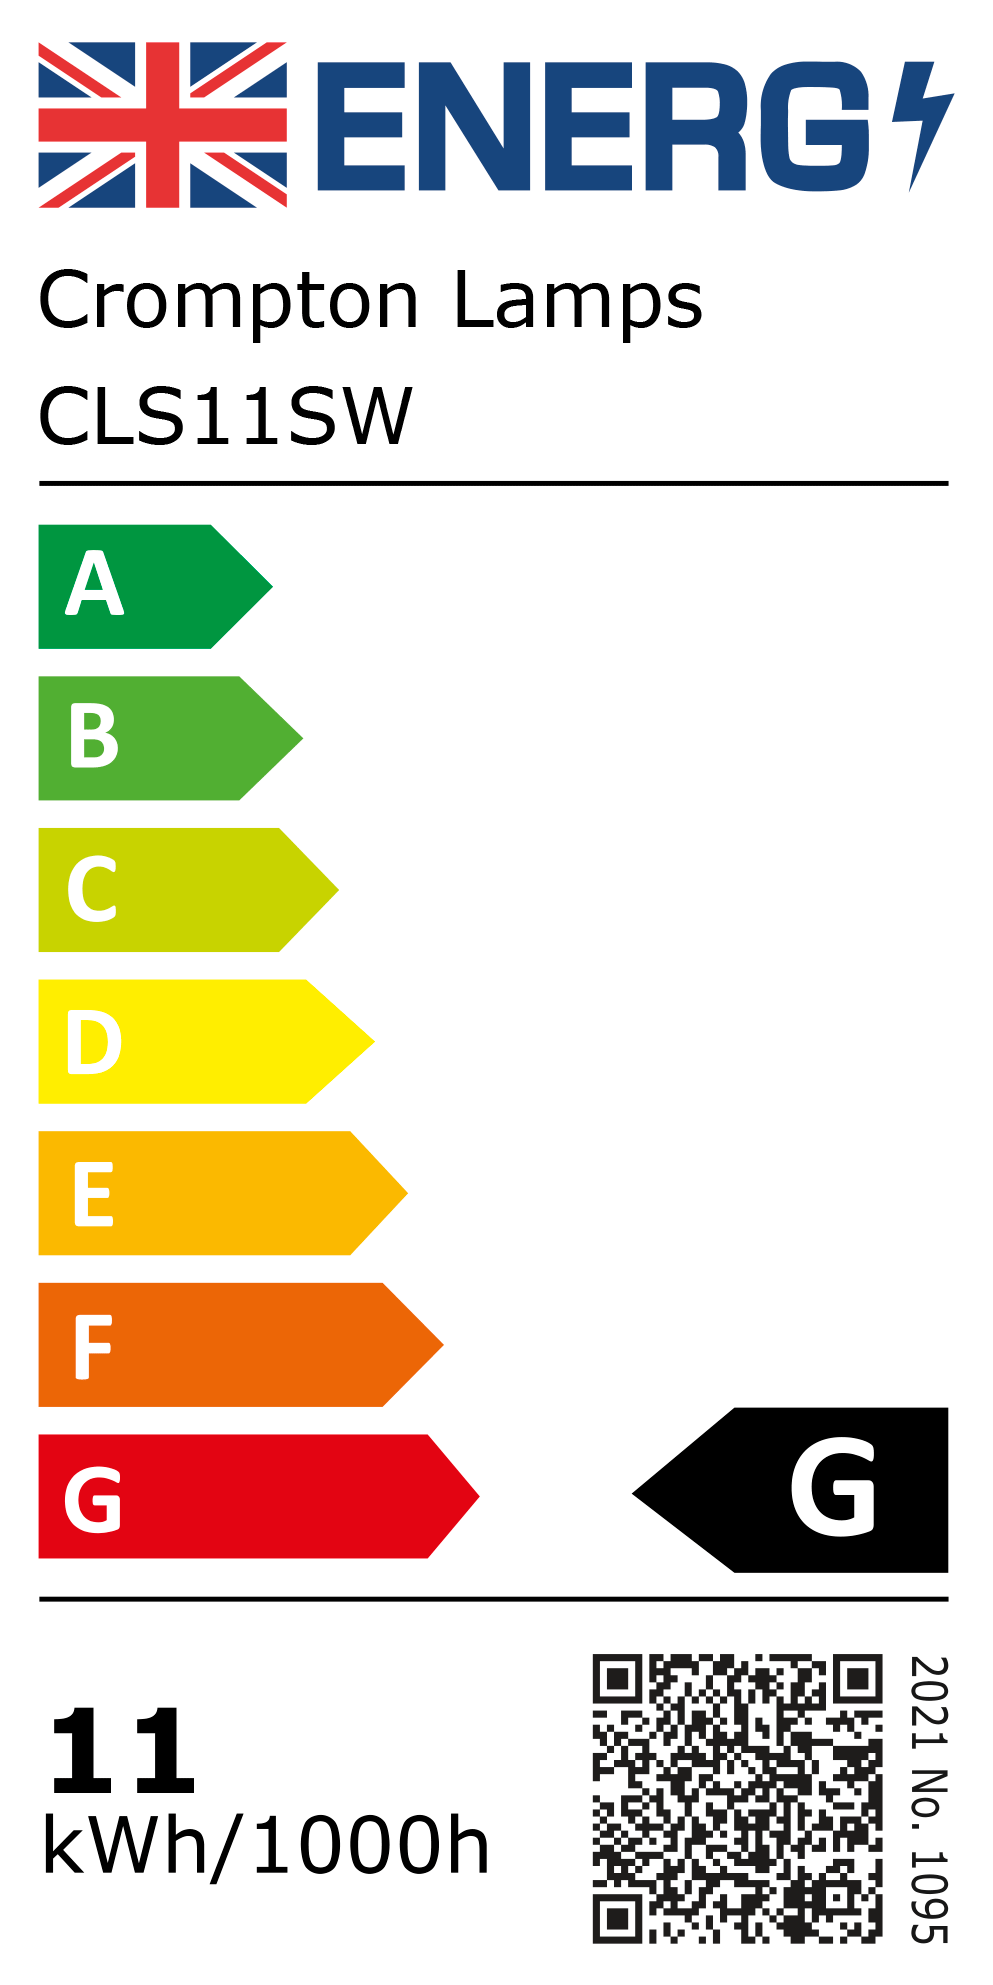 New 2021 Energy Rating Label: Stock Code CLS11SW